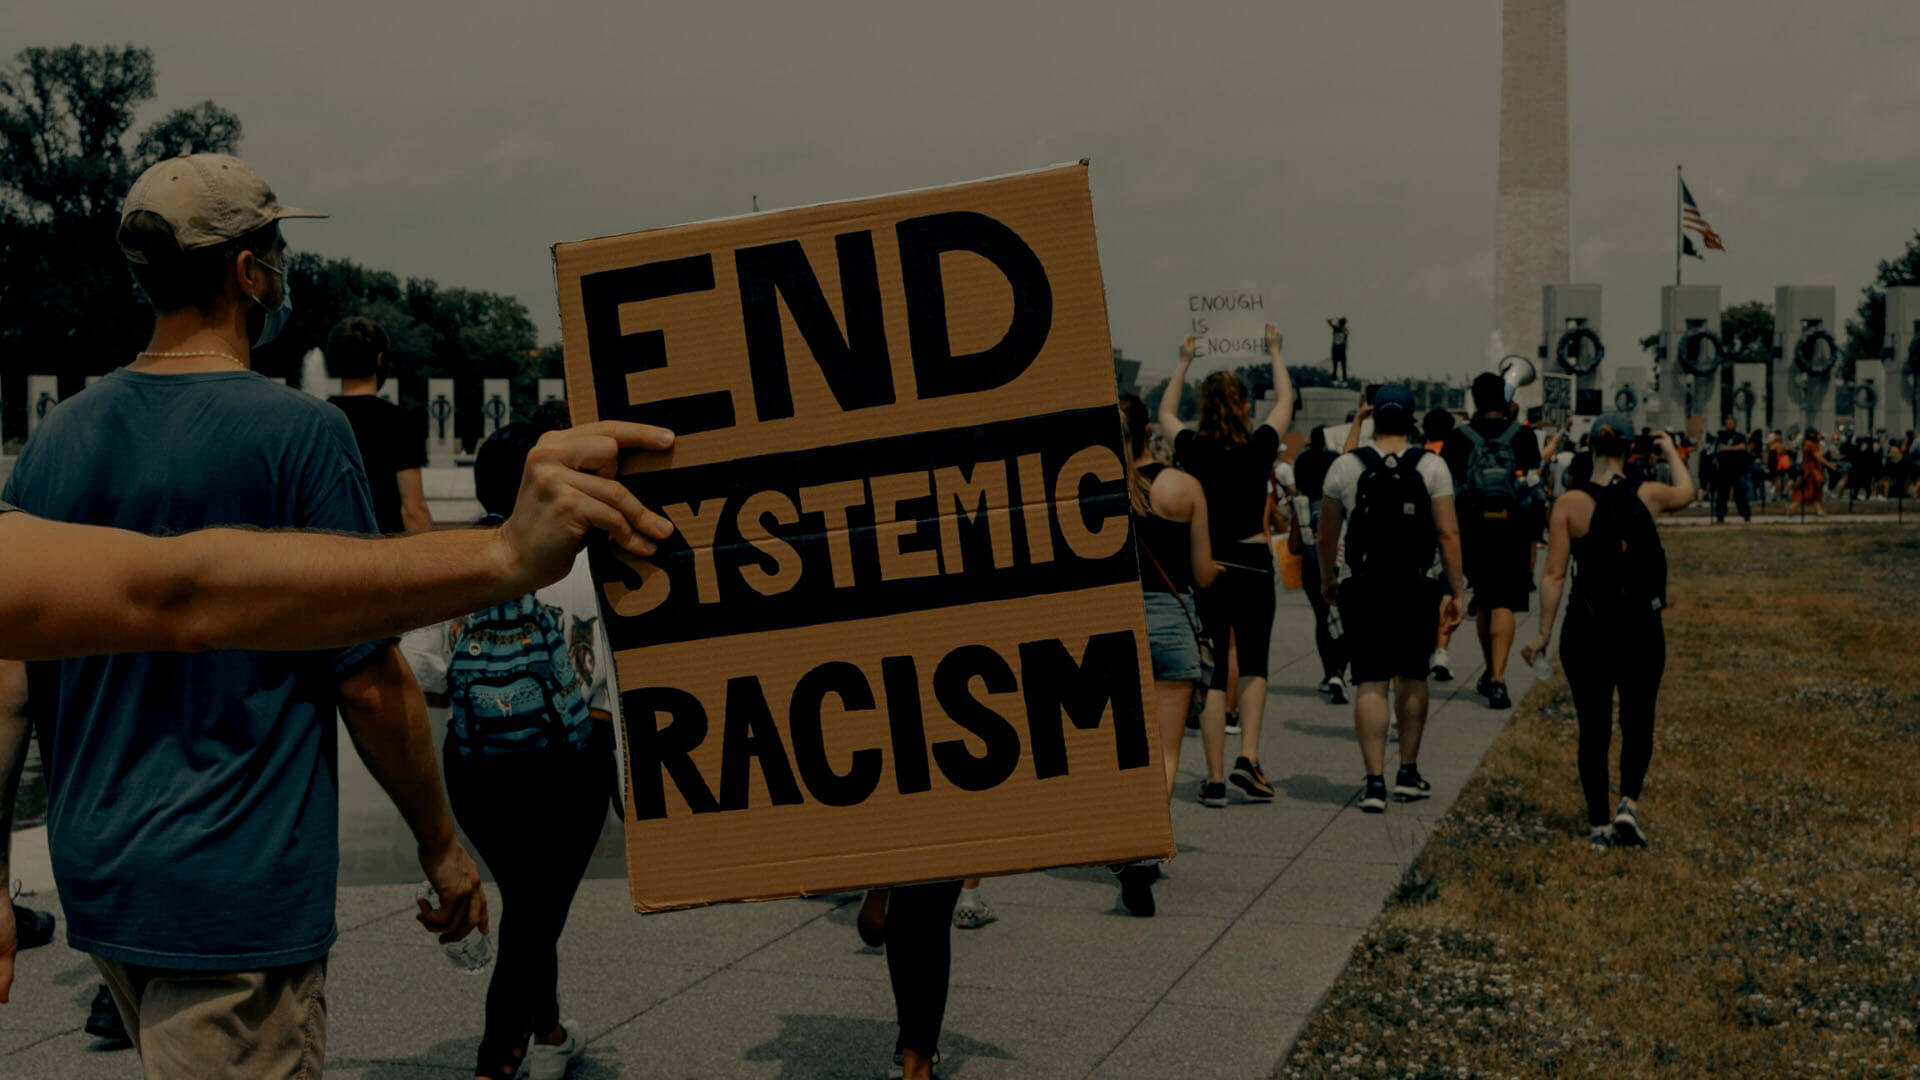 person holding end systemic racism sign